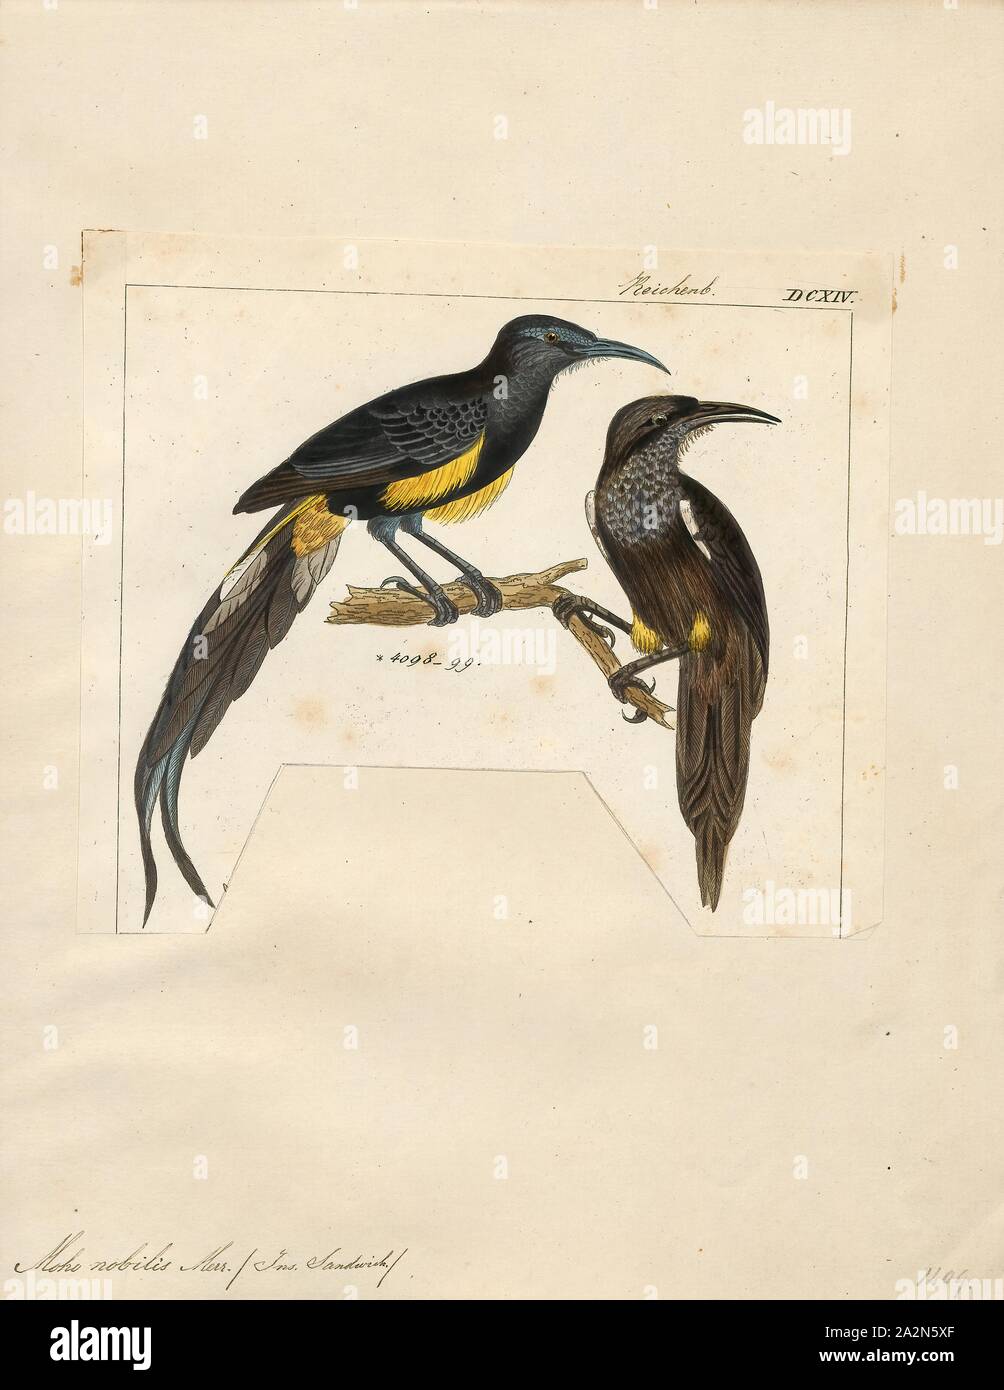 Moho nobilis, Print, The Hawaii 'ō'ō (Moho nobilis) is a member of the extinct genus of the 'ō'ōs (Moho) within the extinct family Mohoidae. It was previously regarded as member of the Australo-Pacific honeyeaters (Meliphagidae)., 1820-1860 Stock Photo